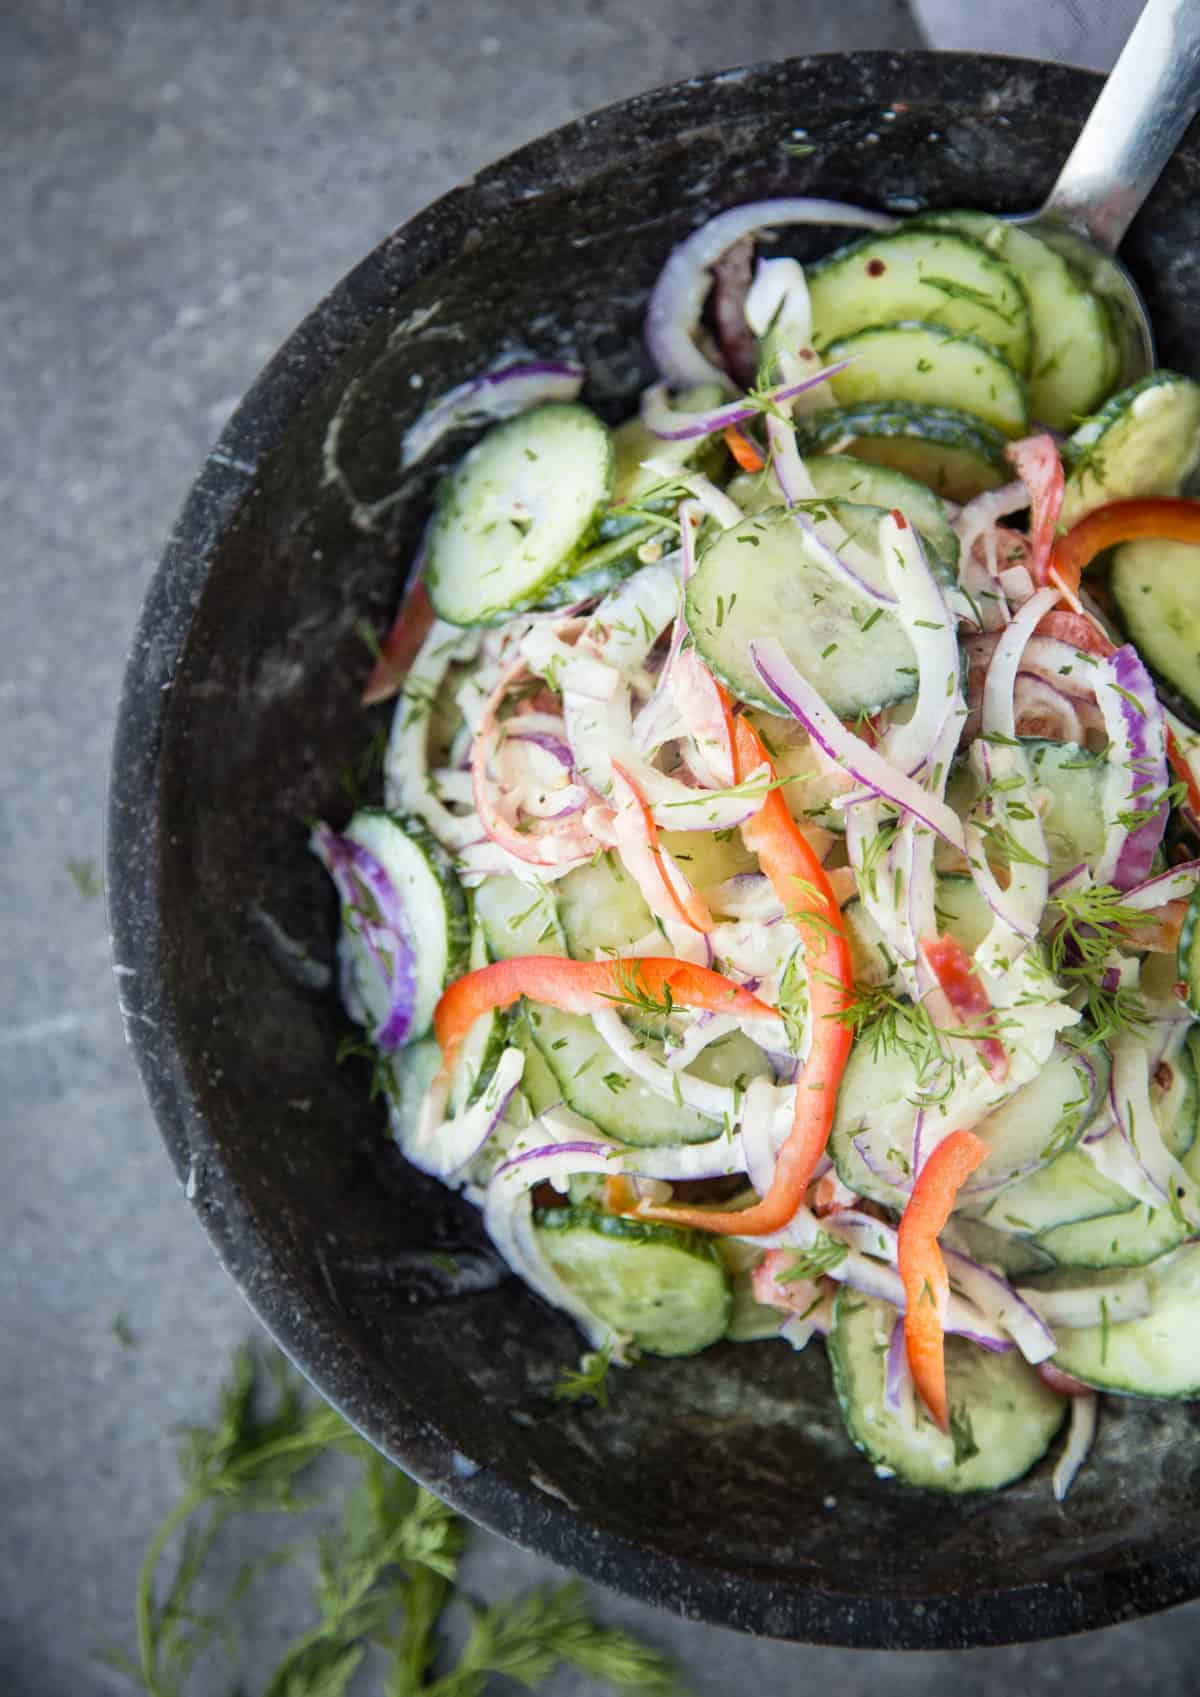 Creamy Cucumber Salad with Dill and White Wine Vinegar